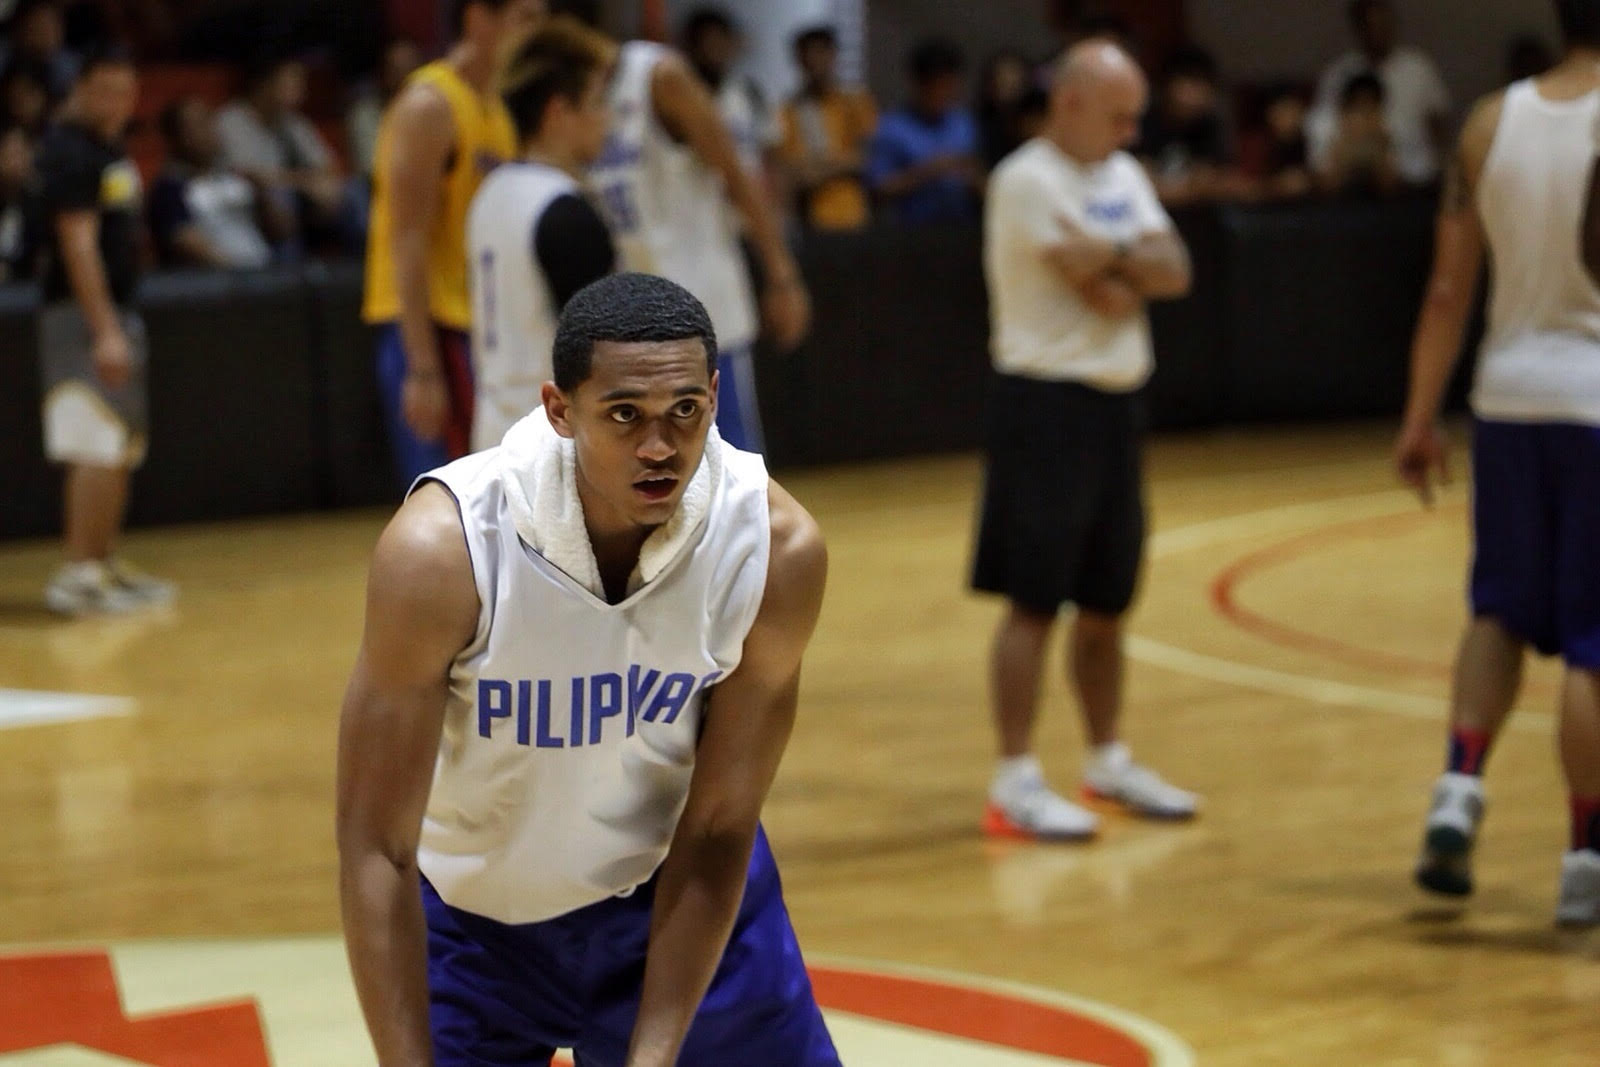 No reason not to join Gilas': Negotiations underway for Clarkson's